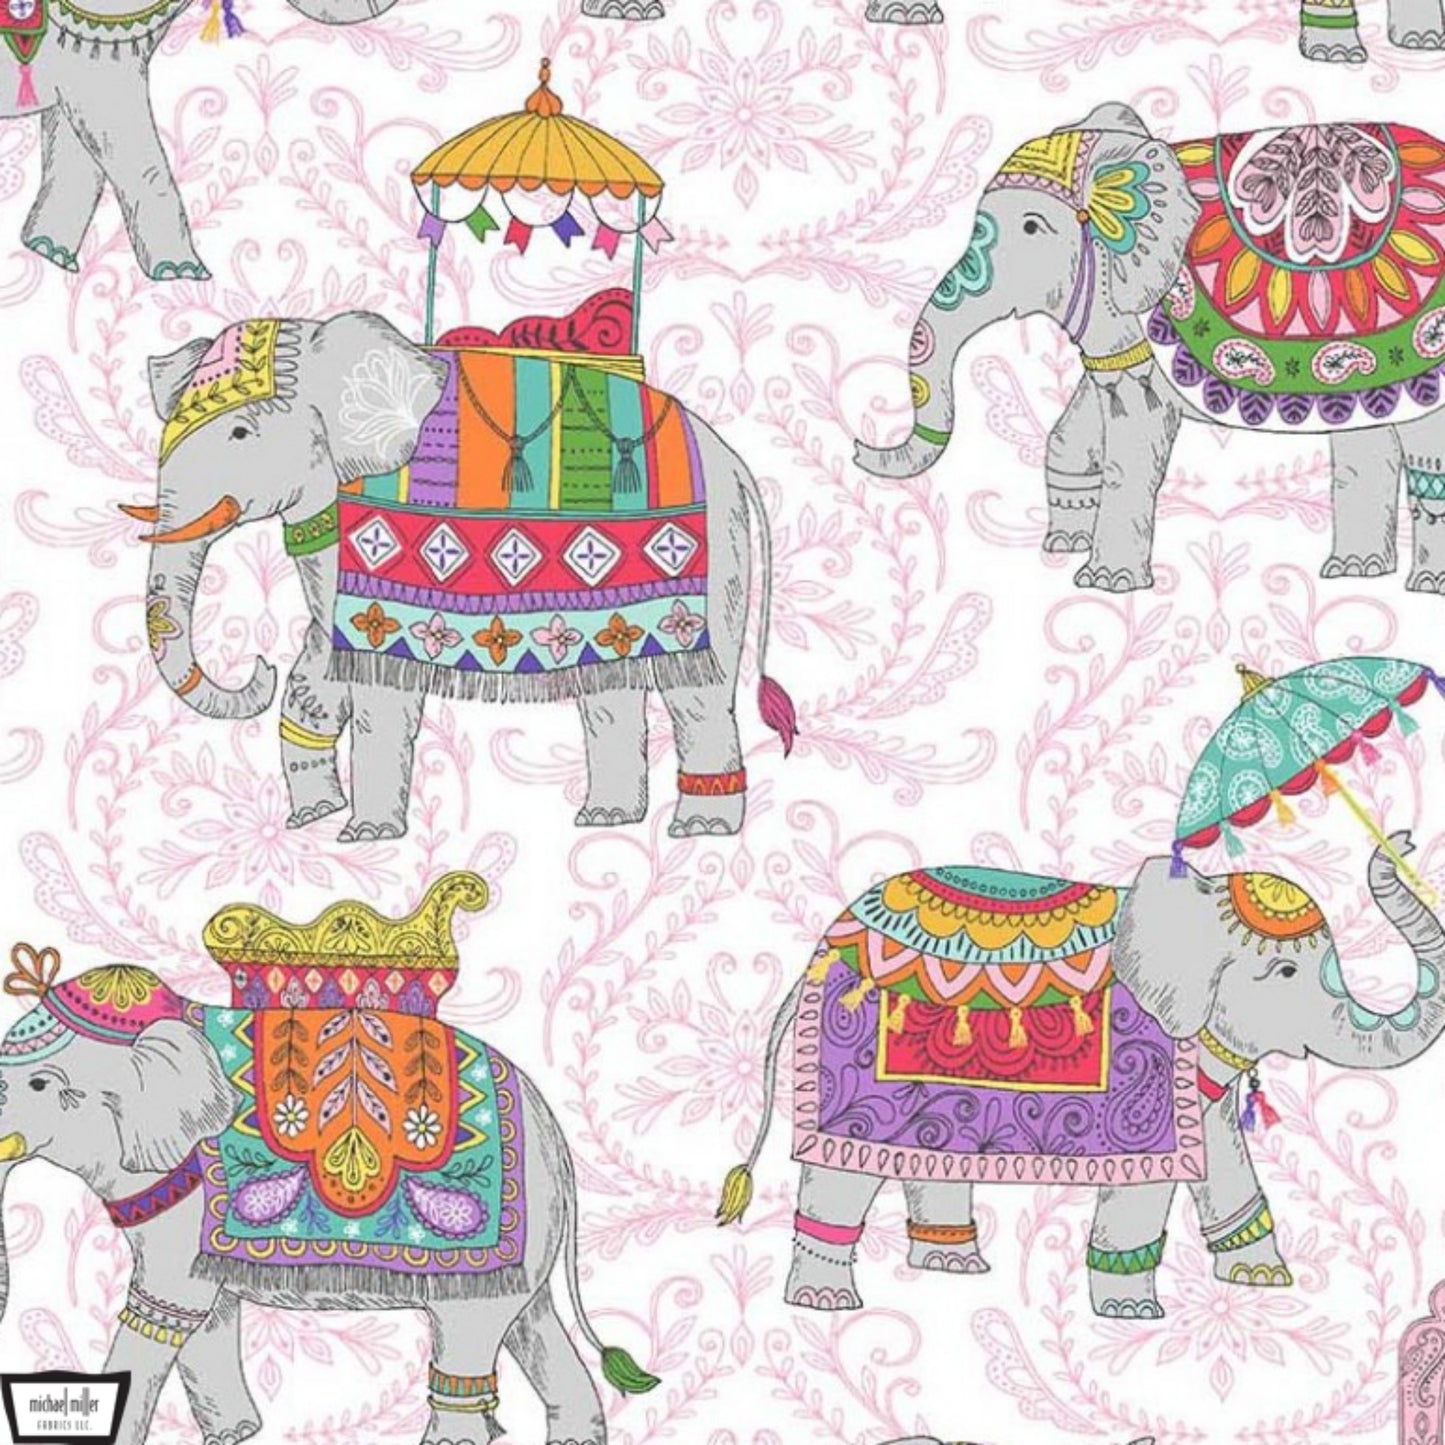 Fabric By the Yard - Royal Elephants - Elephant Cavalcade Collection - CX10792-Pink-D - Michael Miller